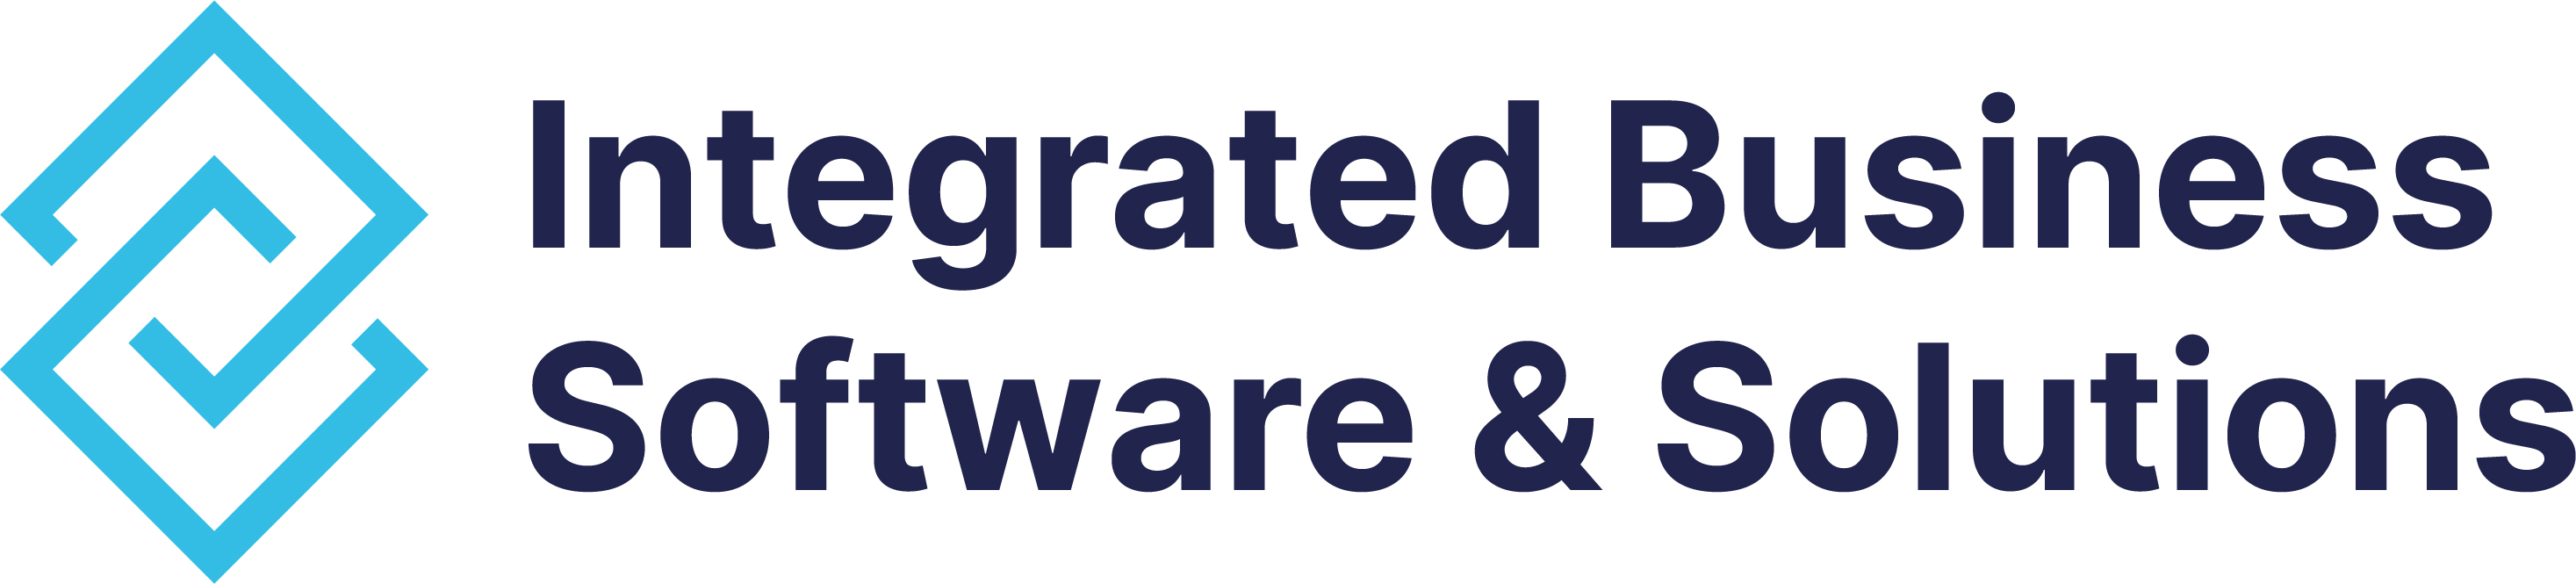 Integrated Business Software and Solutions logo